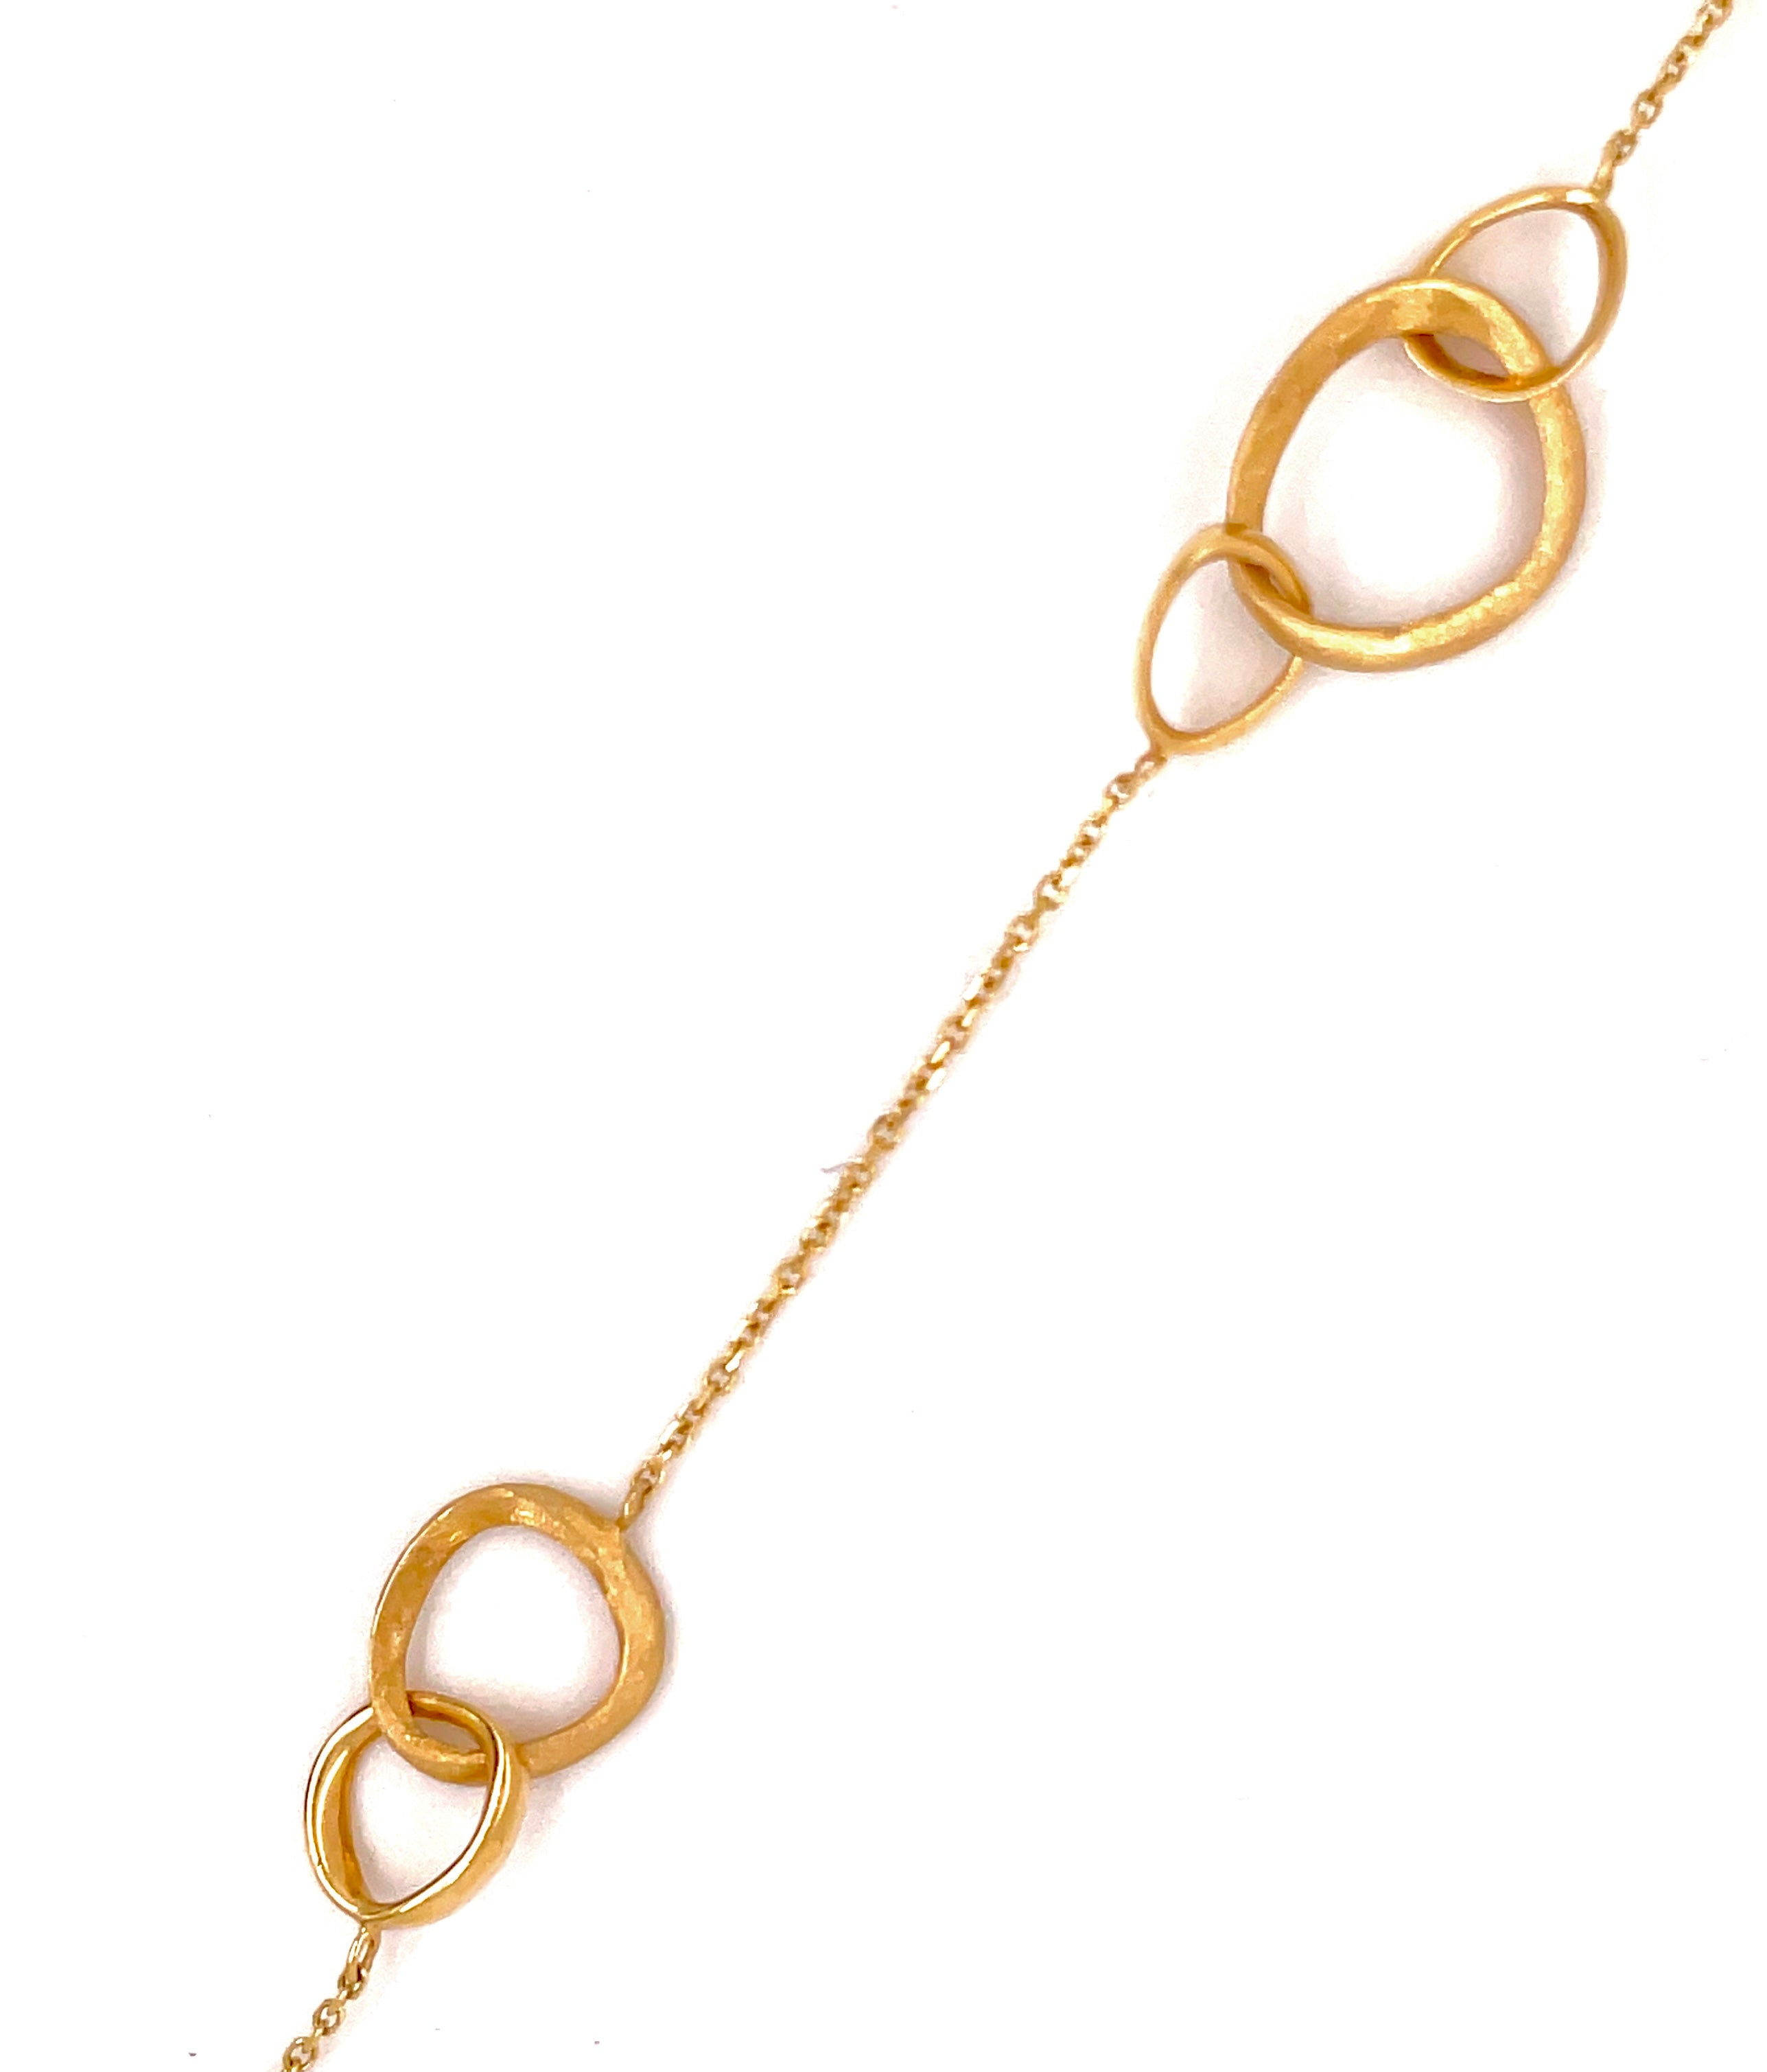 This 14k Yellow Gold Italian-made bracelet is 7" long, with the largest circle measuring 13.50. Its secure lobster catch ensures a safe closure, while its circle design adds a timeless aesthetic.